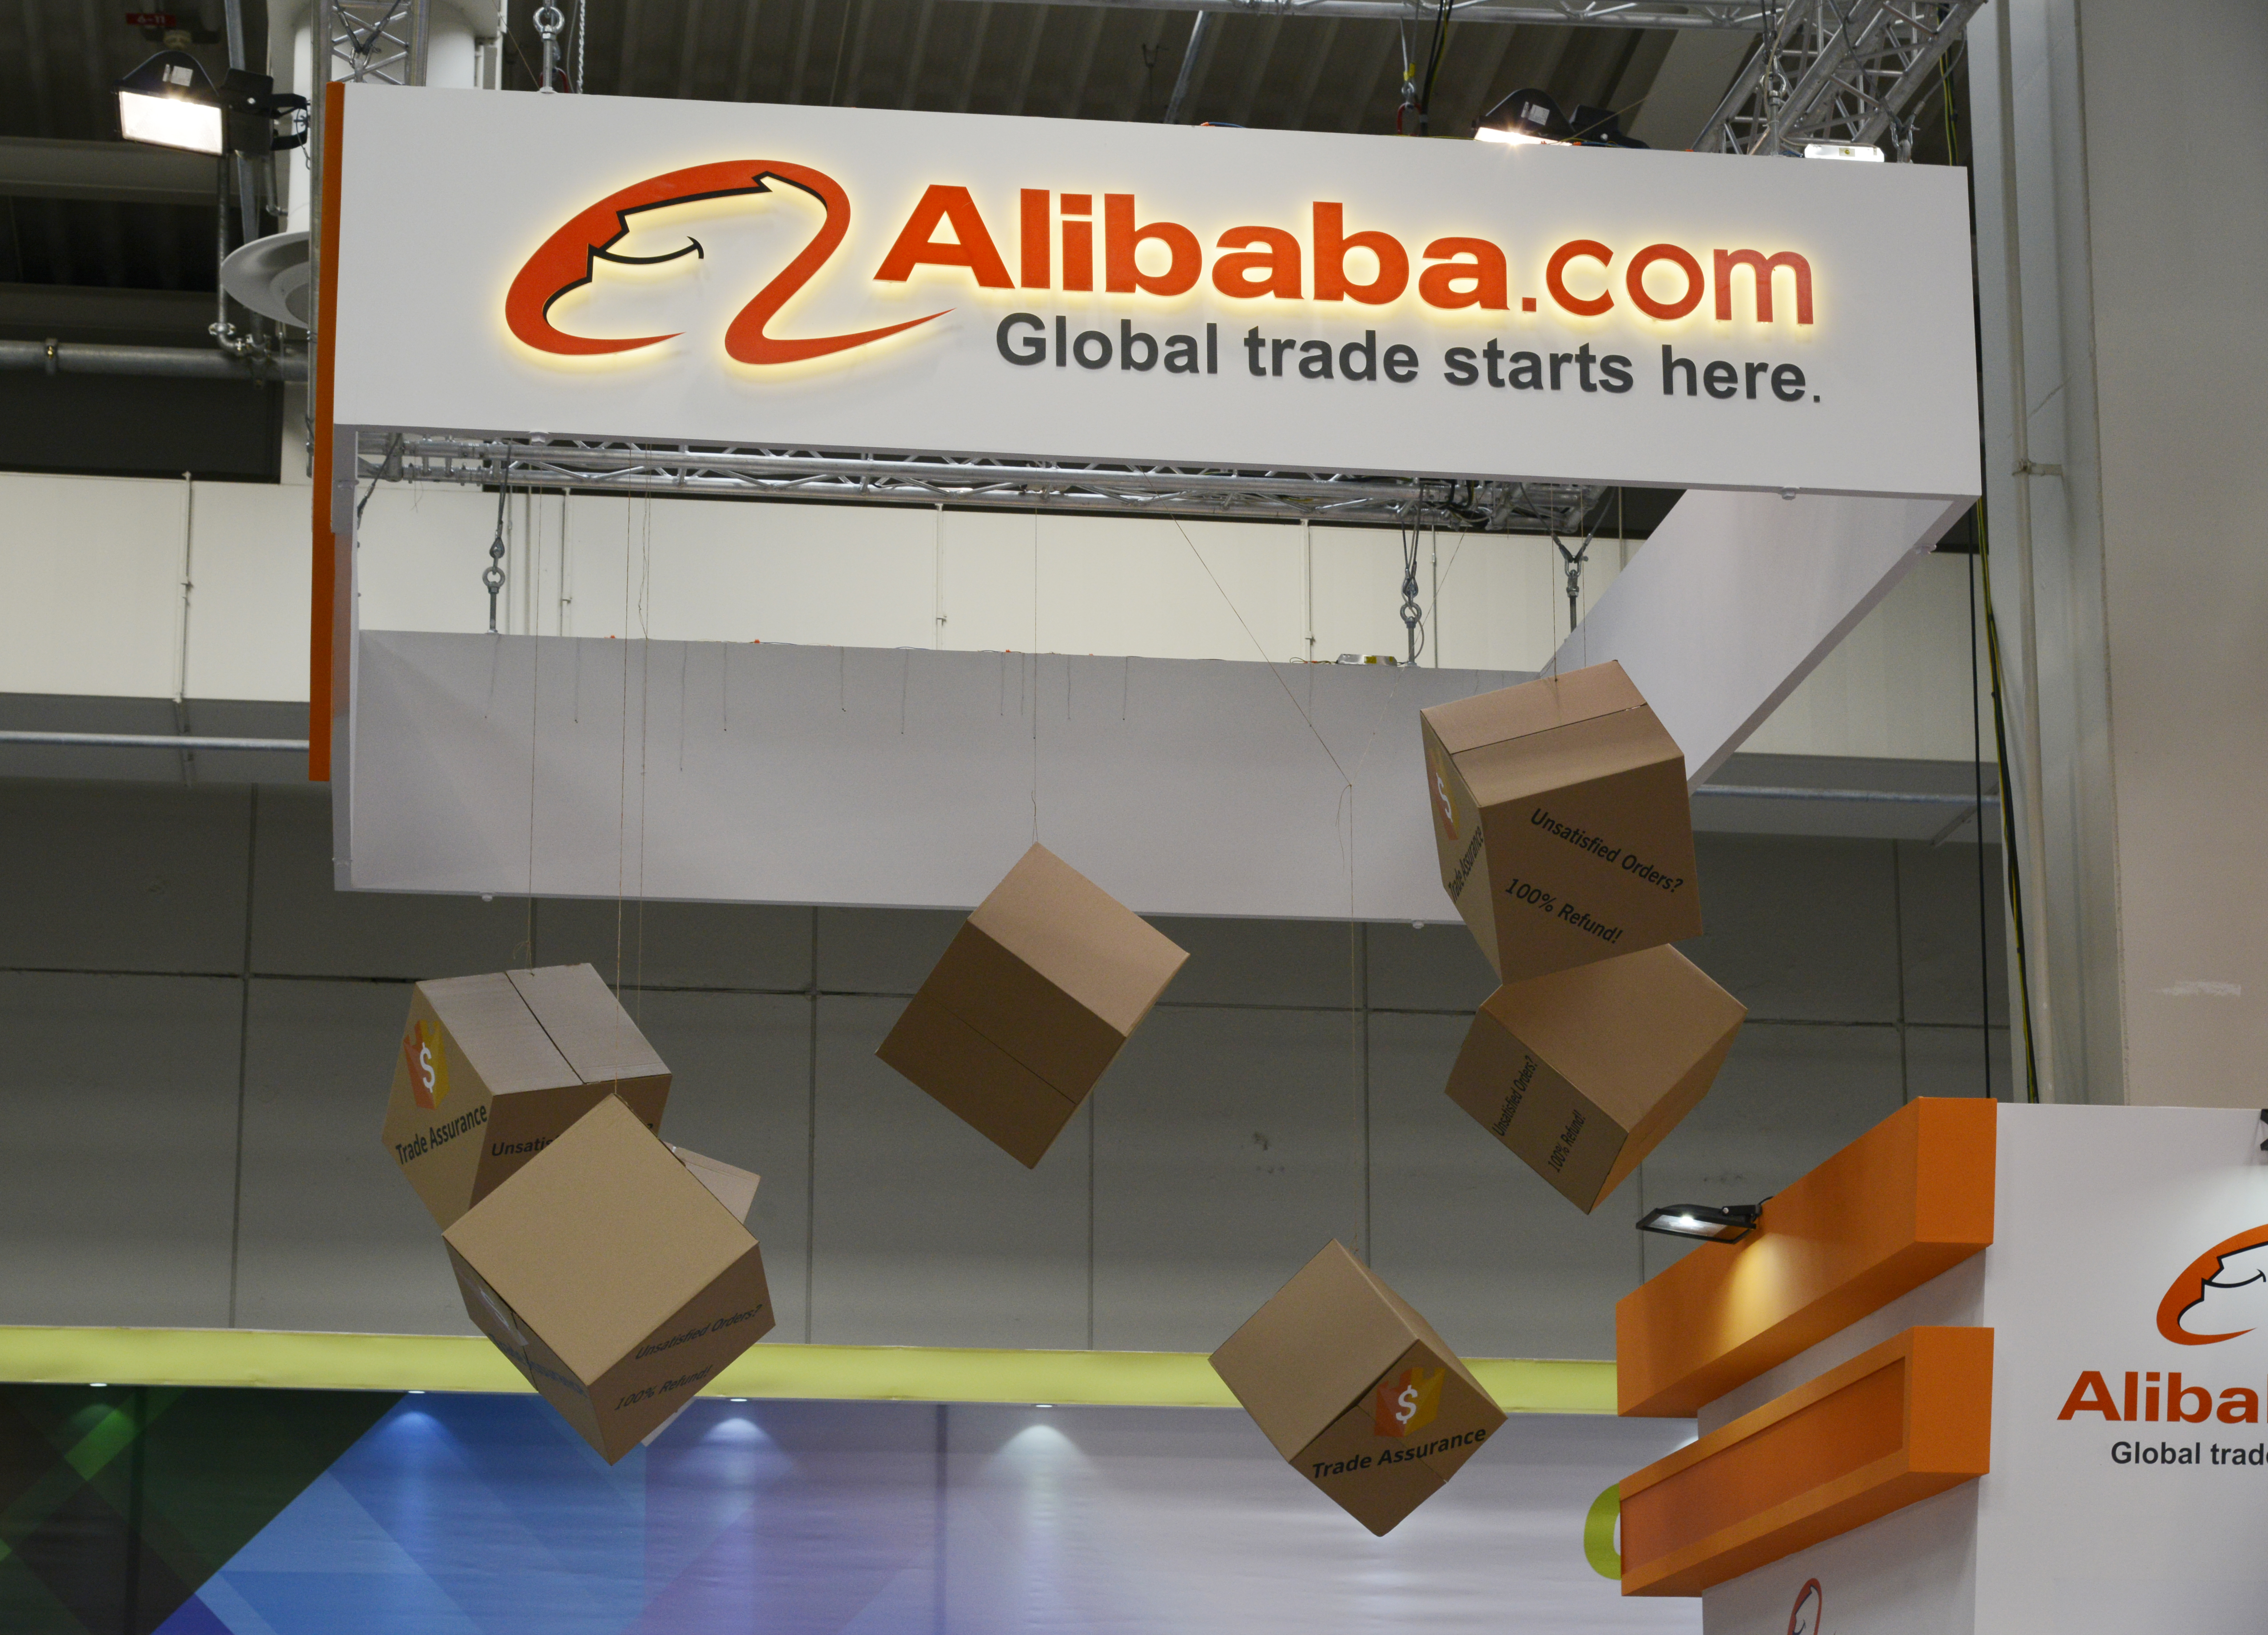 SURGE IN GROWTH. A file photo dated March 16, 2016 shows the Alibaba.com stand at the CeBIT computer show in Hanover, Germany. File photo by Mauritz Antin/EPA 